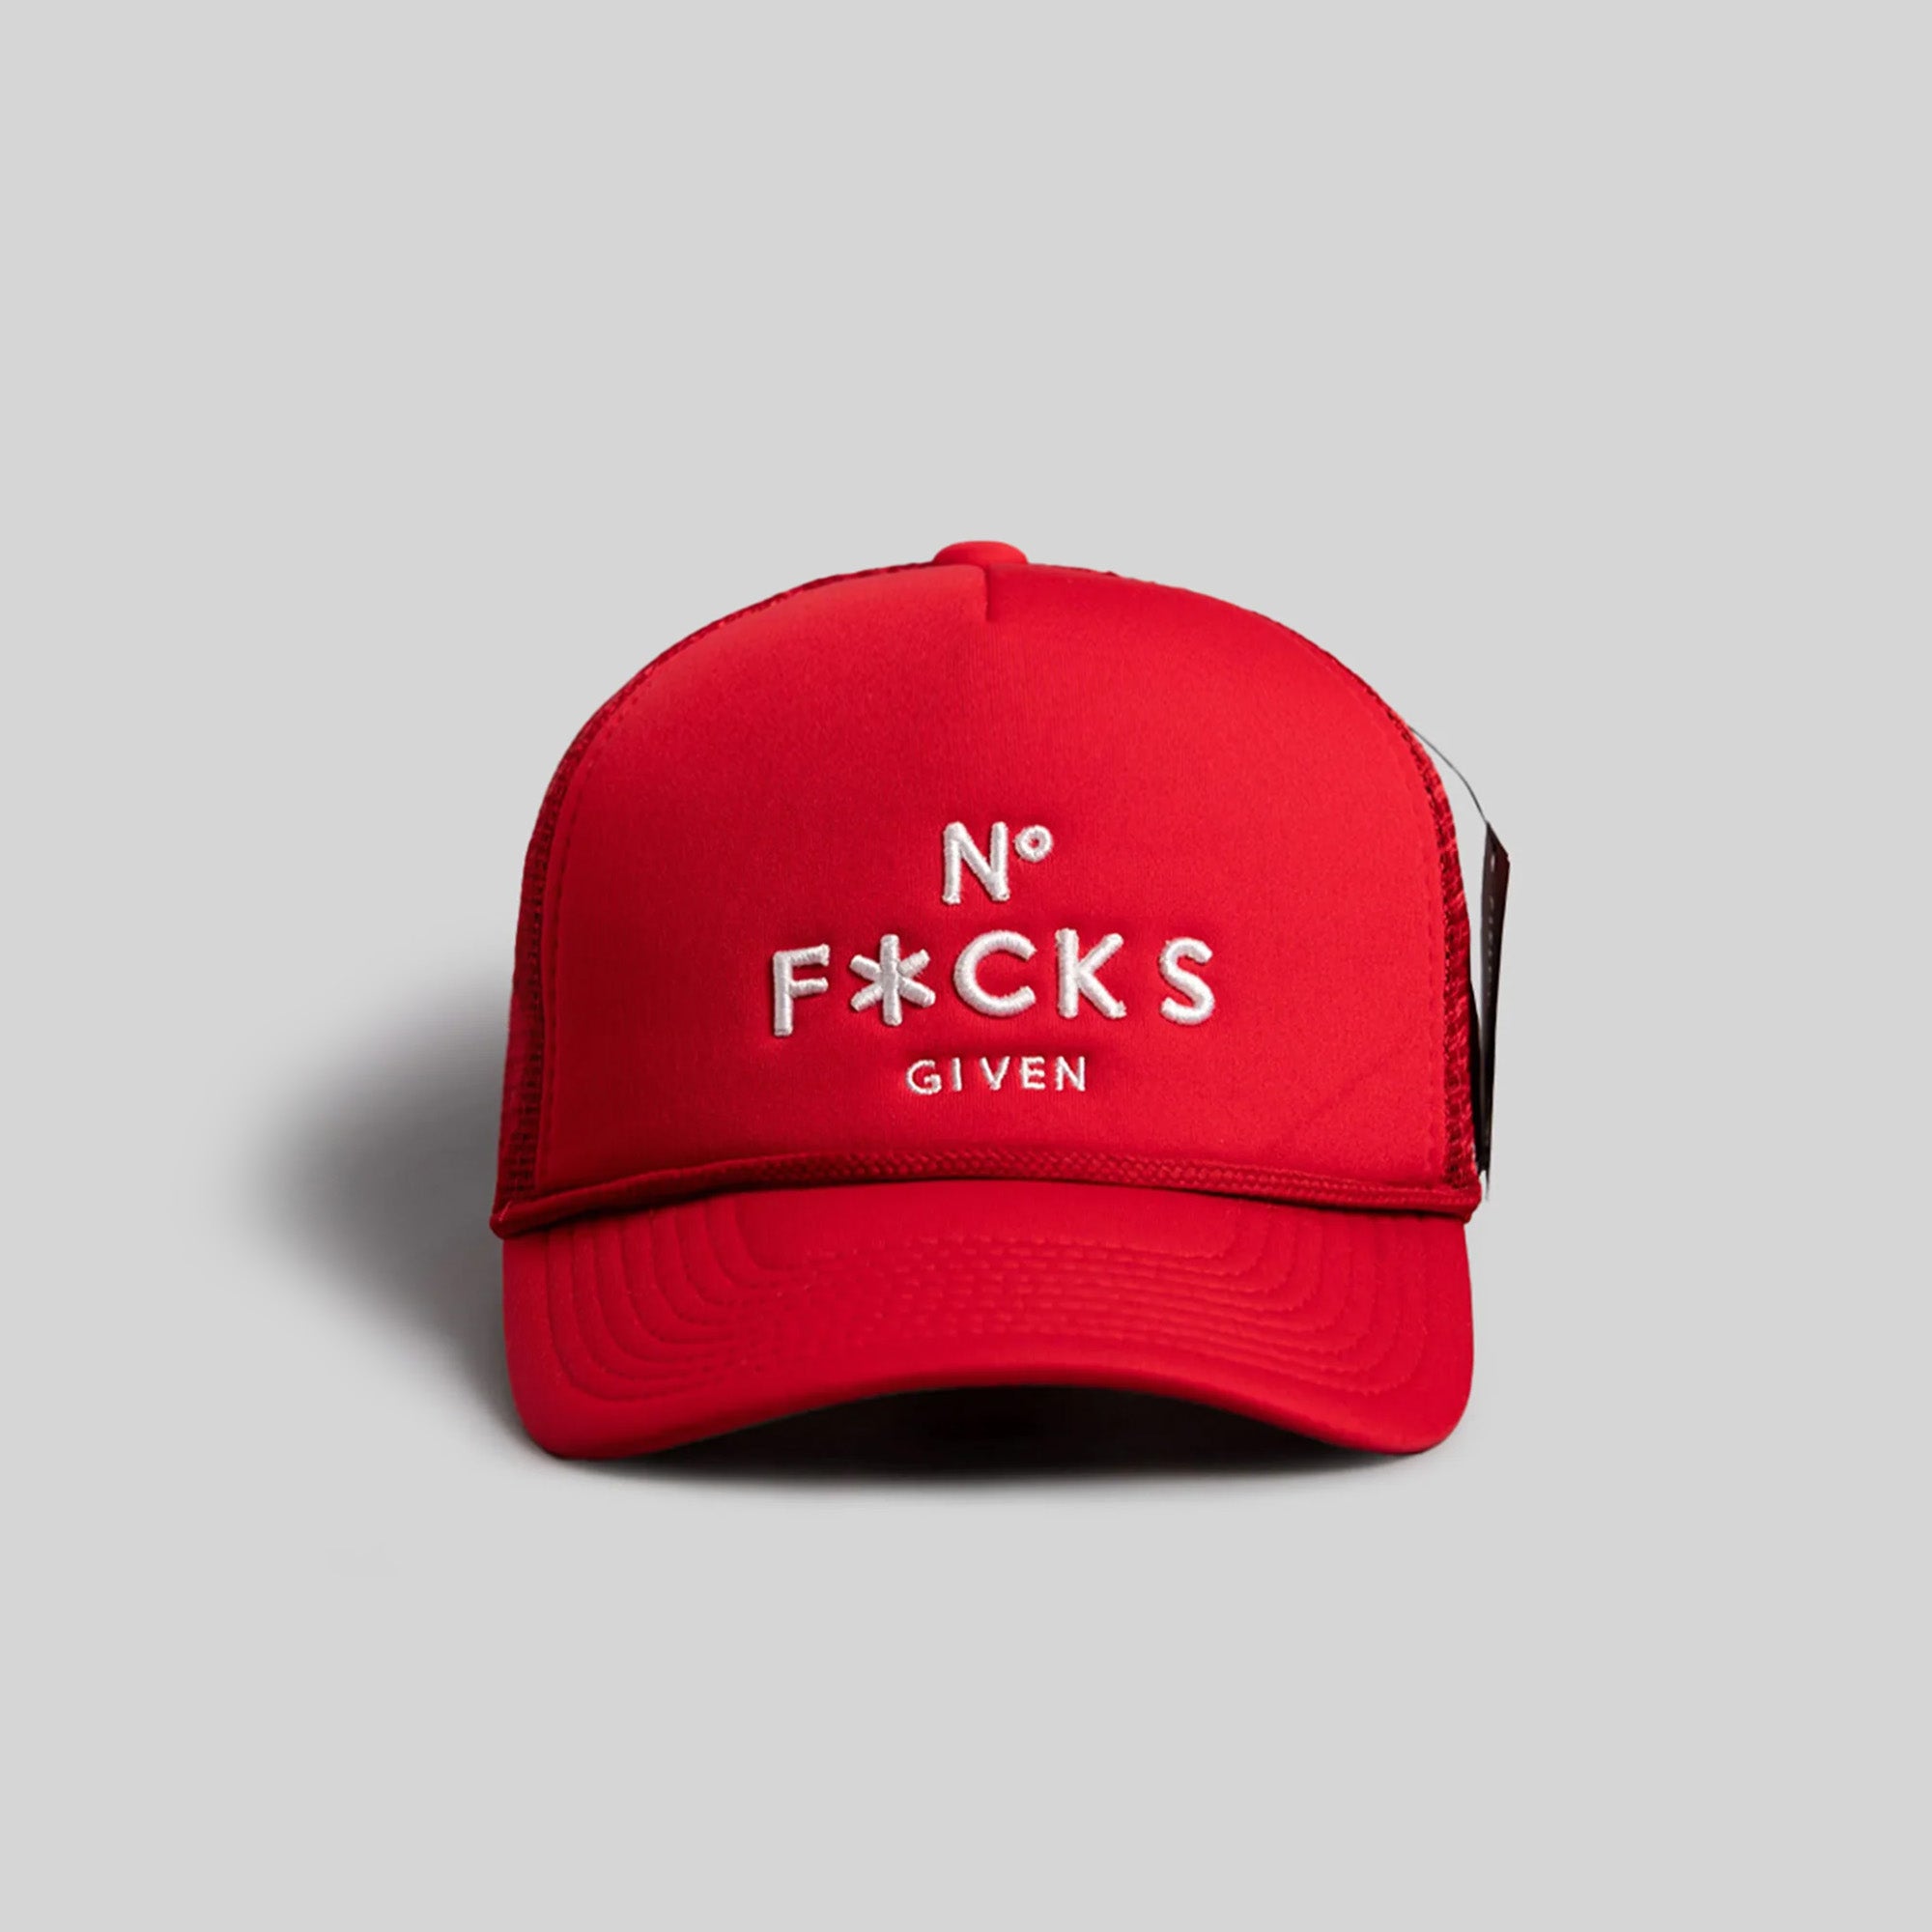 NO F*CKS GIVEN RED TRUCKER HAT